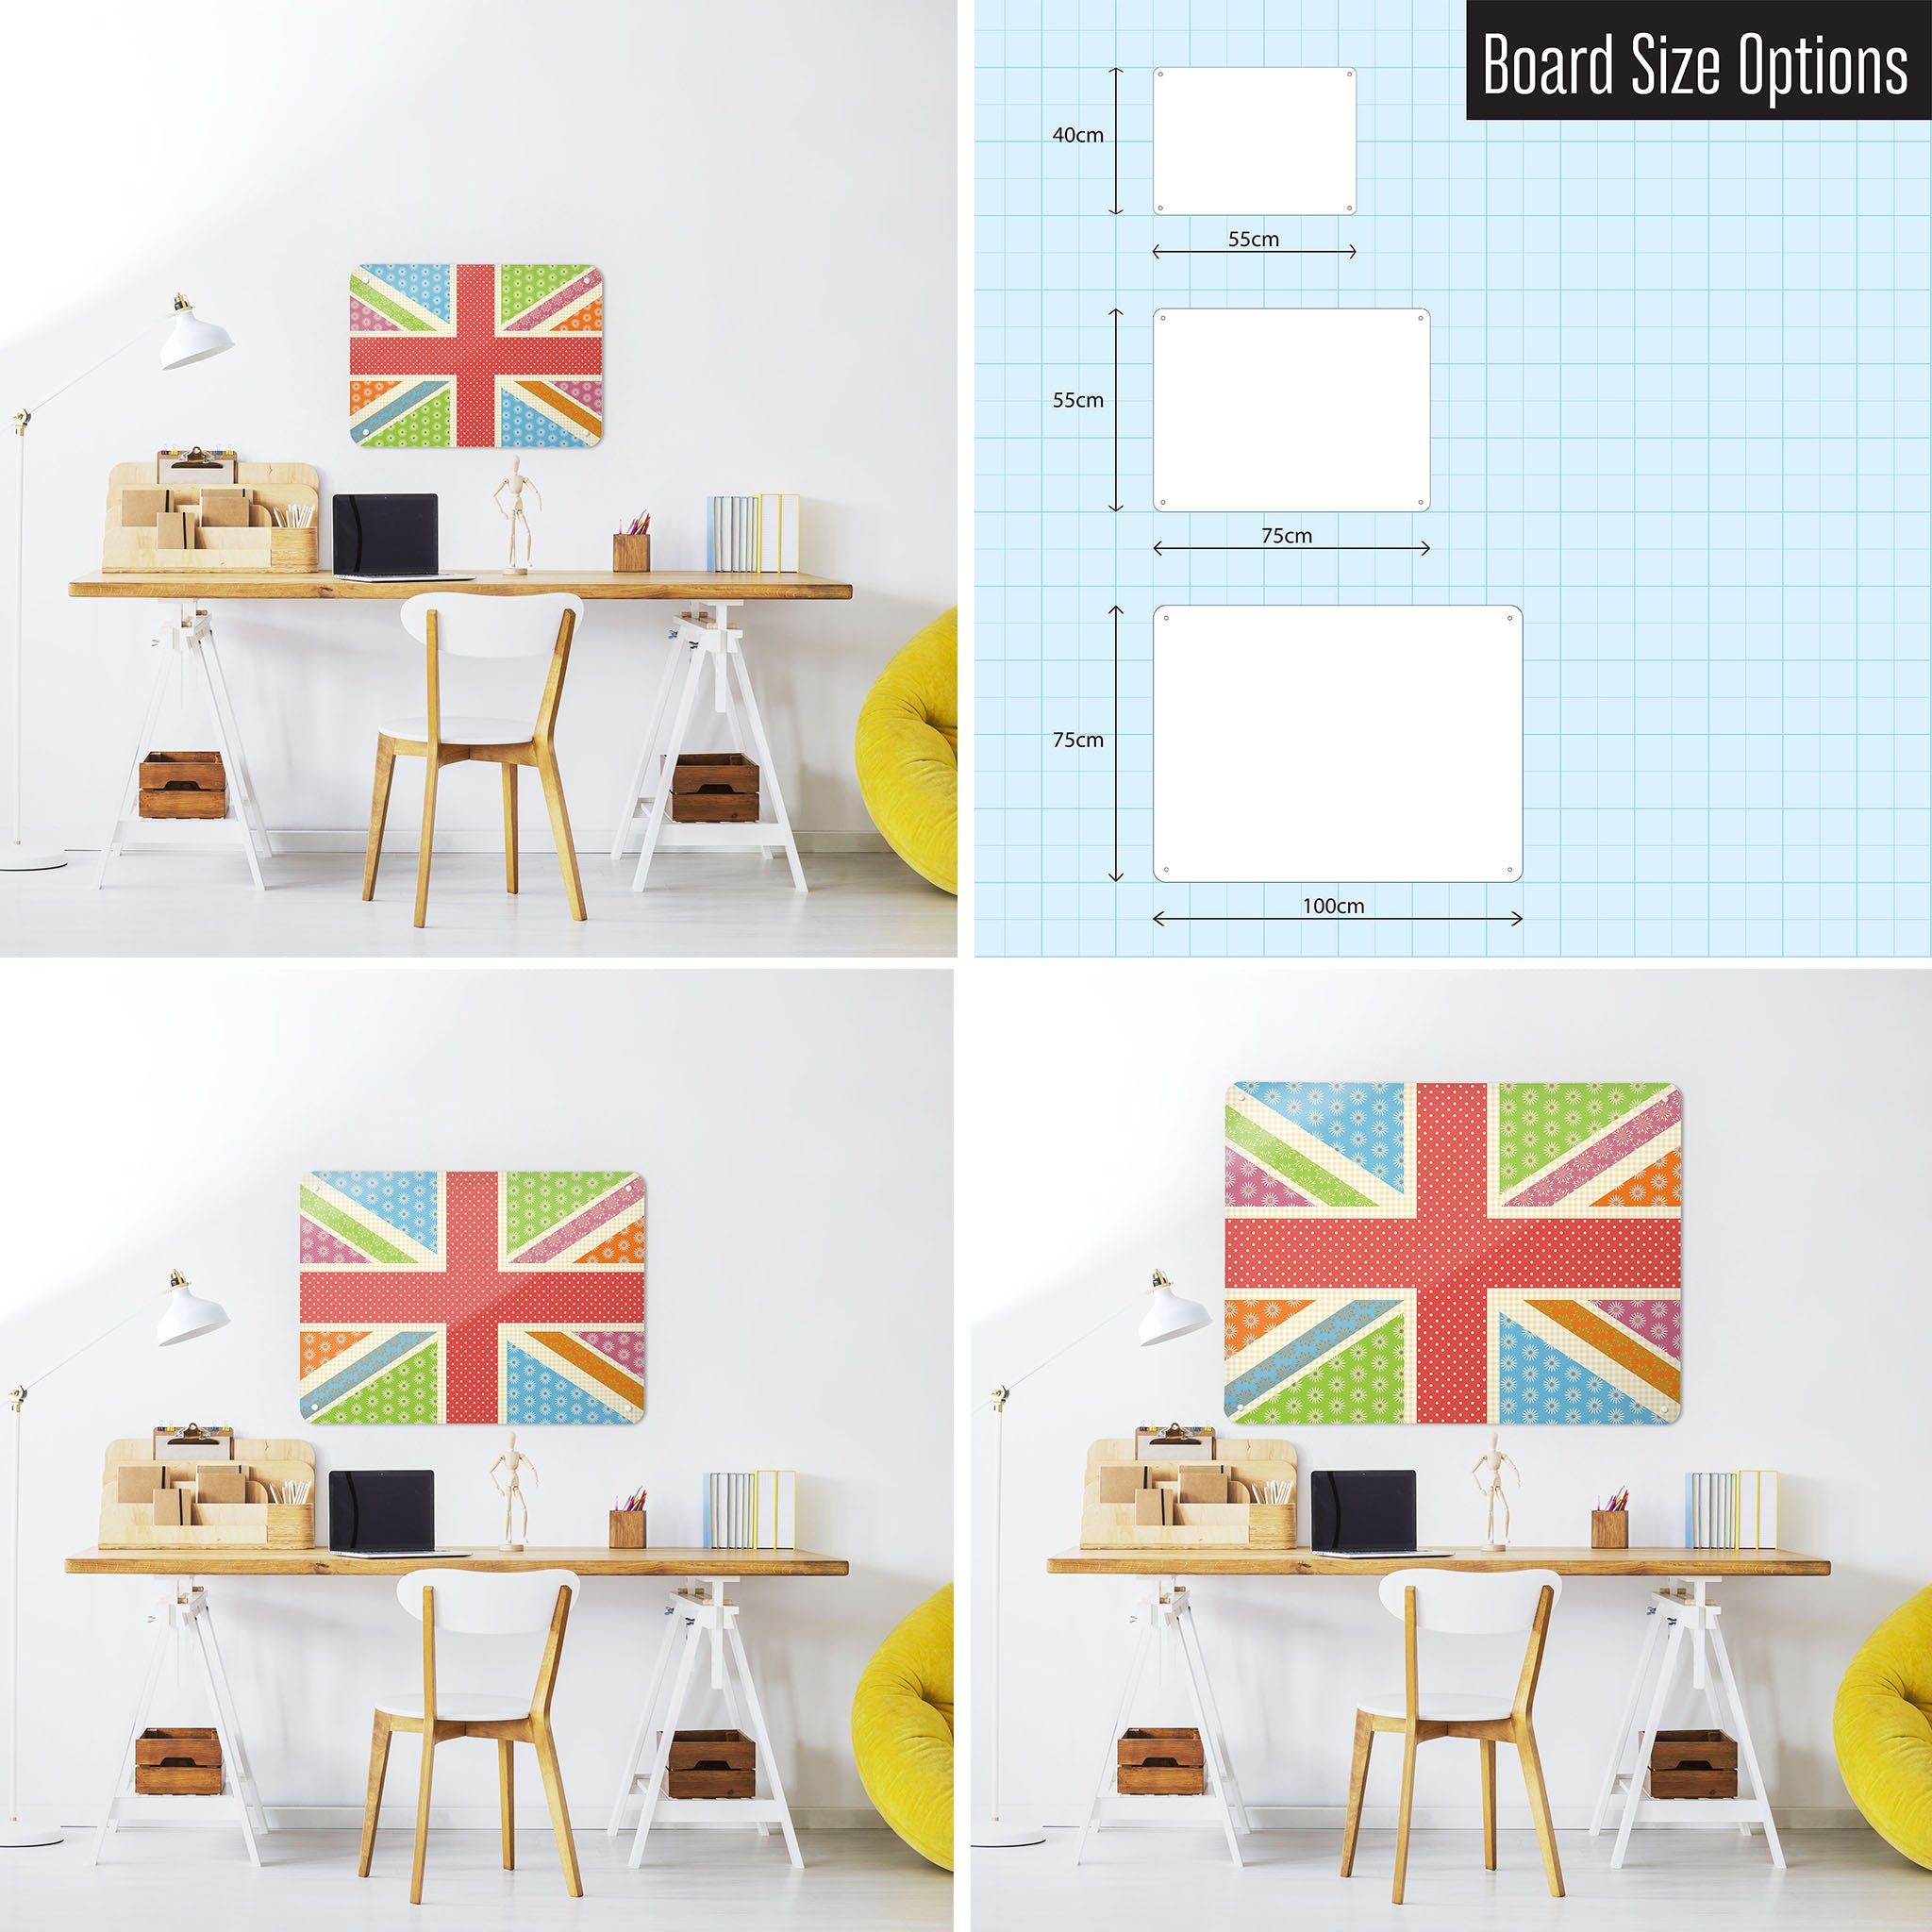 Three photographs of a workspace interior and a diagram to show size comparisons of a Cool Britannia design magnetic notice board